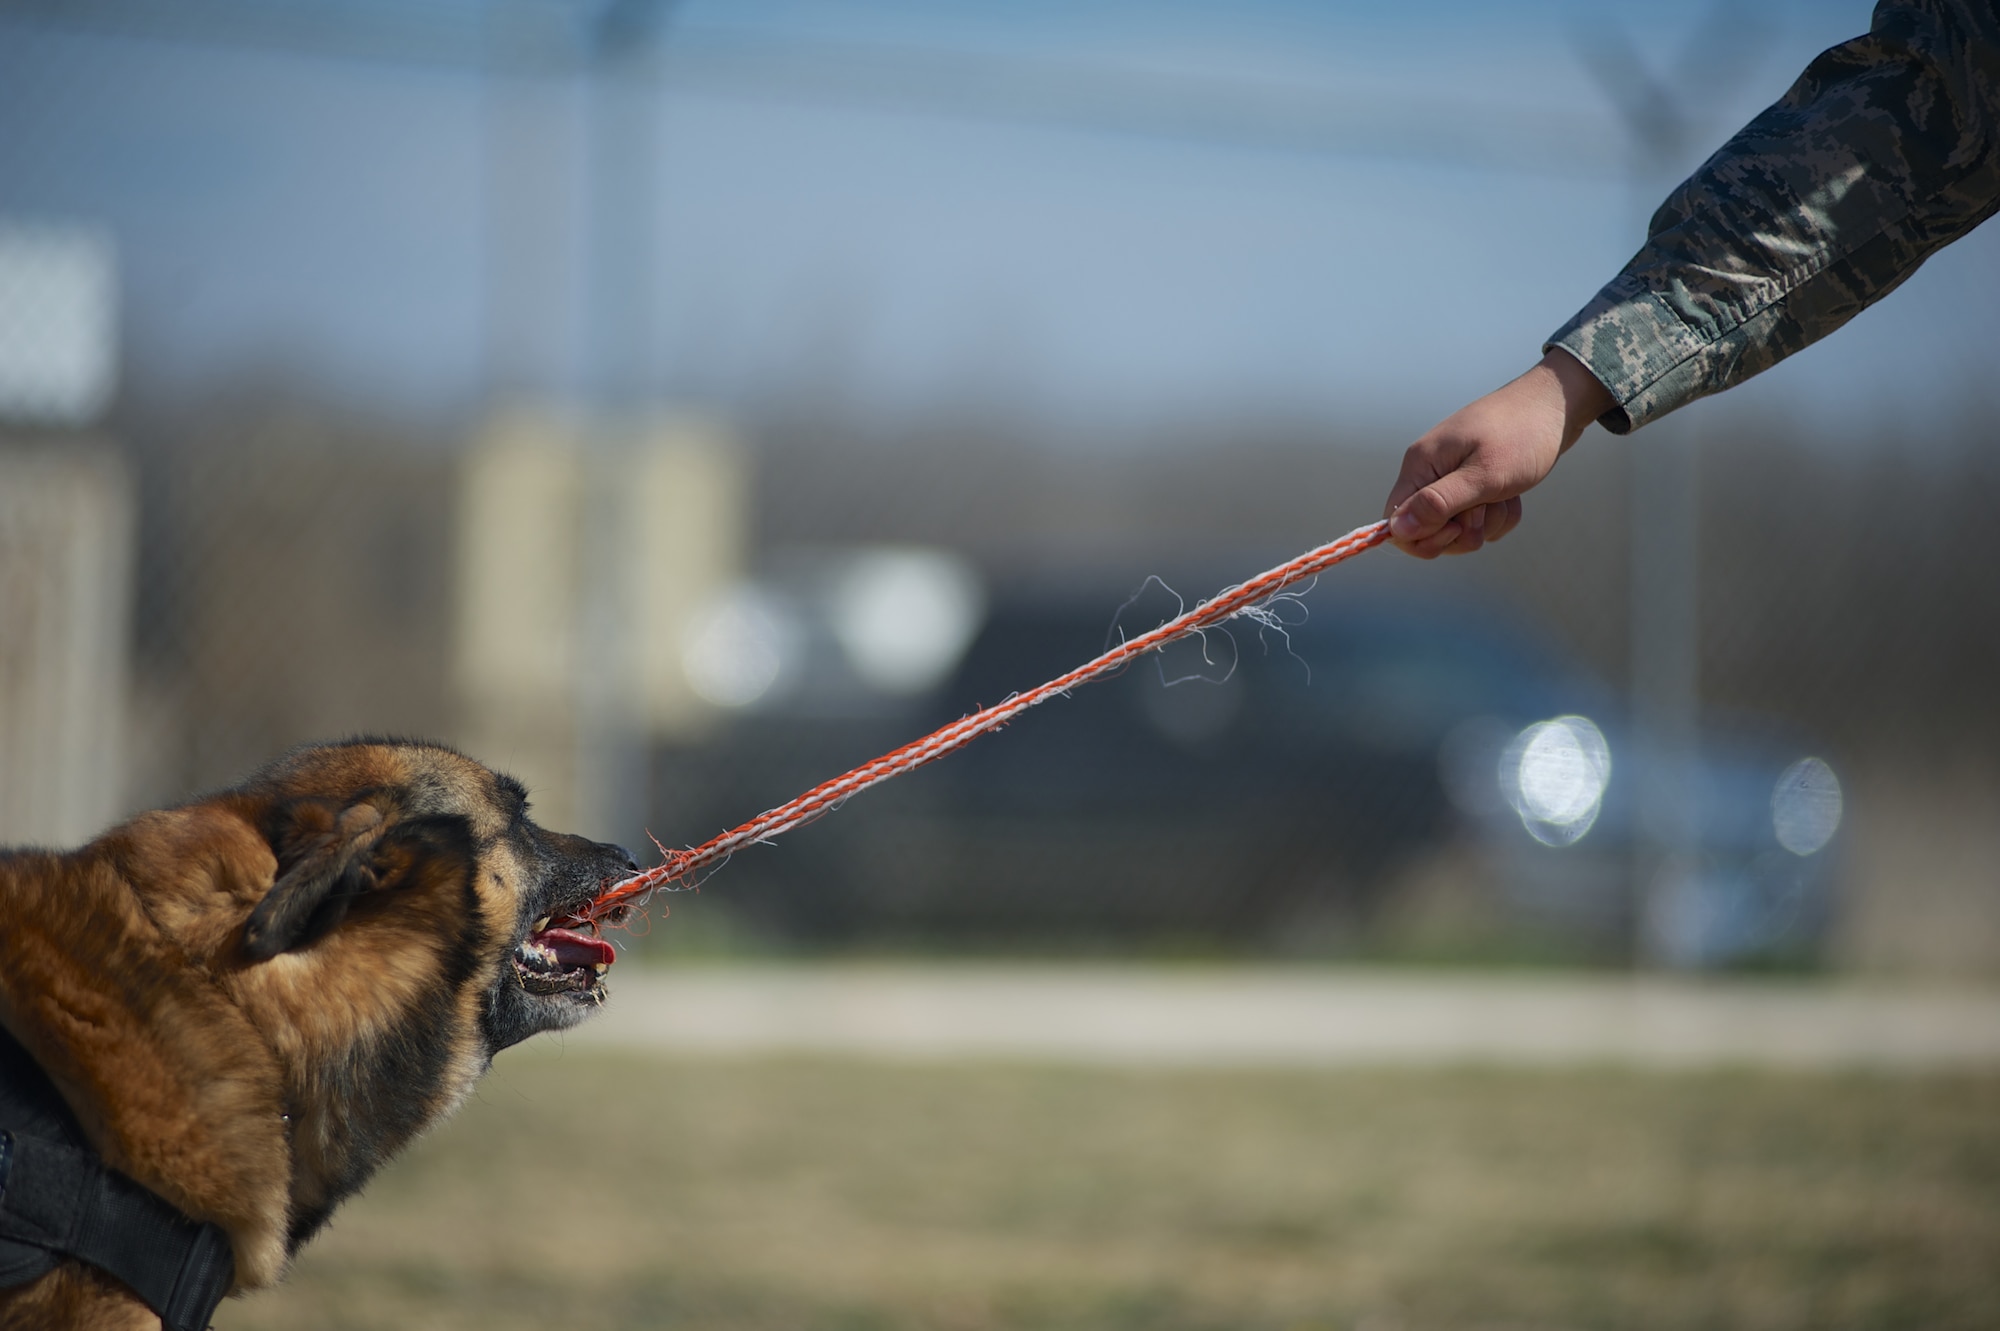 U.S. Air Force 2nd. Lt. Karrissa Garza, 7th Logistics Readiness Squadron, plays with military working dog (MWD) Condor March 26, 2013, at the 7th Security Forces Squadron MWD Compound on Dyess Air Force Base Texas. Garza is in the process of adopting Condor upon his retirement from the Air Force and pays frequent visits in order to form a bond with the dog. Condor, an 8 year old belgian malinois, is a veteran of Operation Iraqi Freedom as well as supported the U.S. Secret Service. (U.S. Air Force Photo by Tech. Sgt. Joshua T. Jasper/Released)
